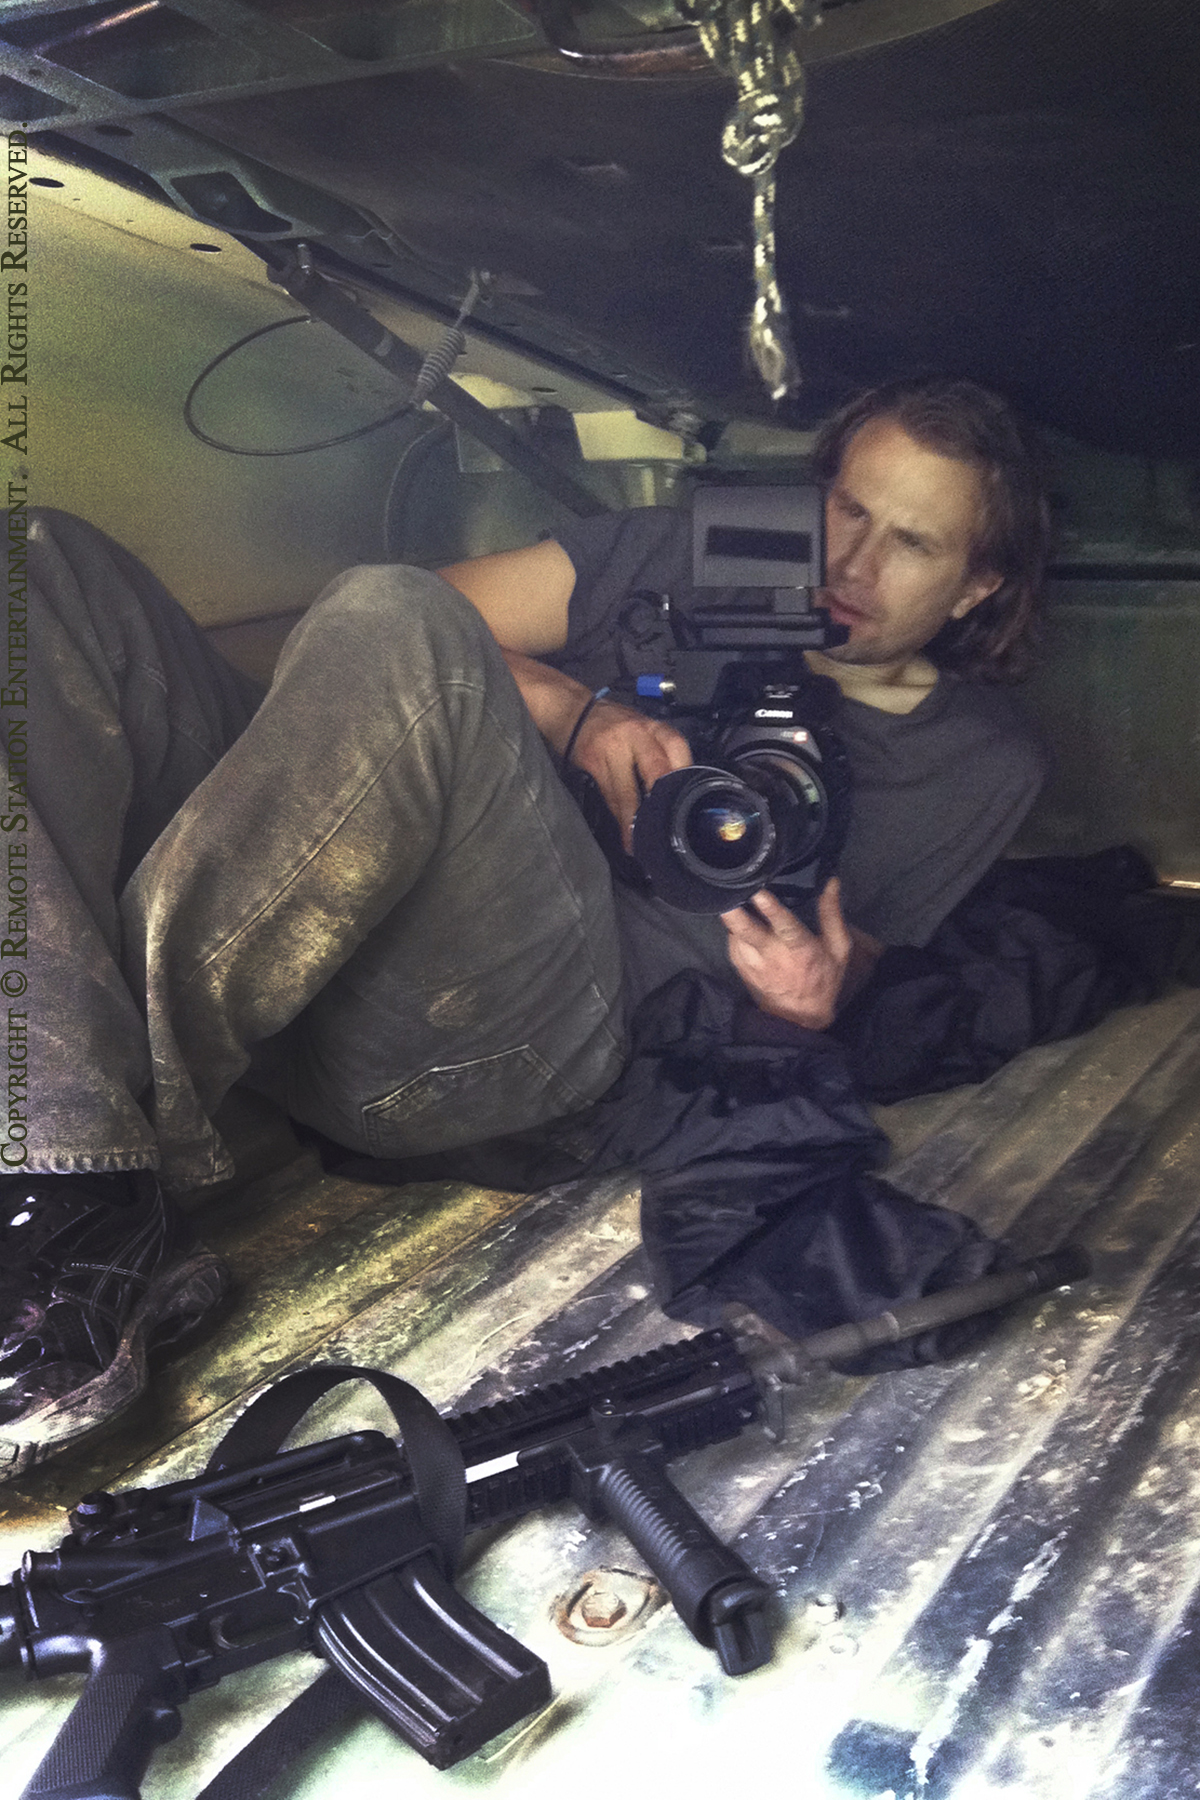 Director, producer, writer and sometimes cinematographer William Norton sets up a shot from within a militarized Humvee for his political thriller False Colors.